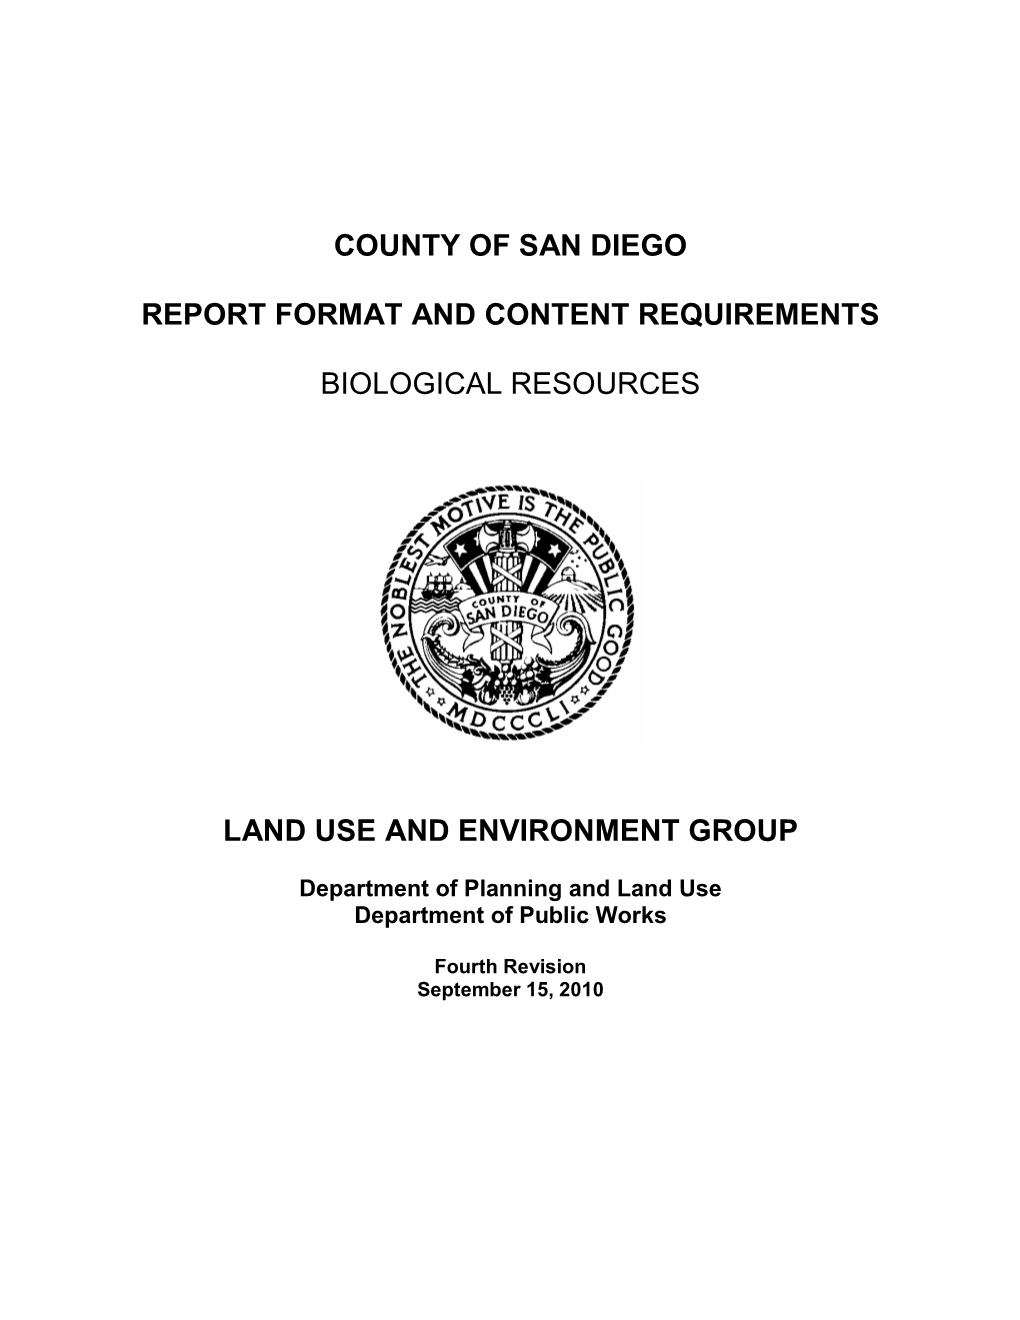 Biological Resources Surveys and Preparing Reports for Discretionary Projects Being Processed by the Land Use and Environment Group